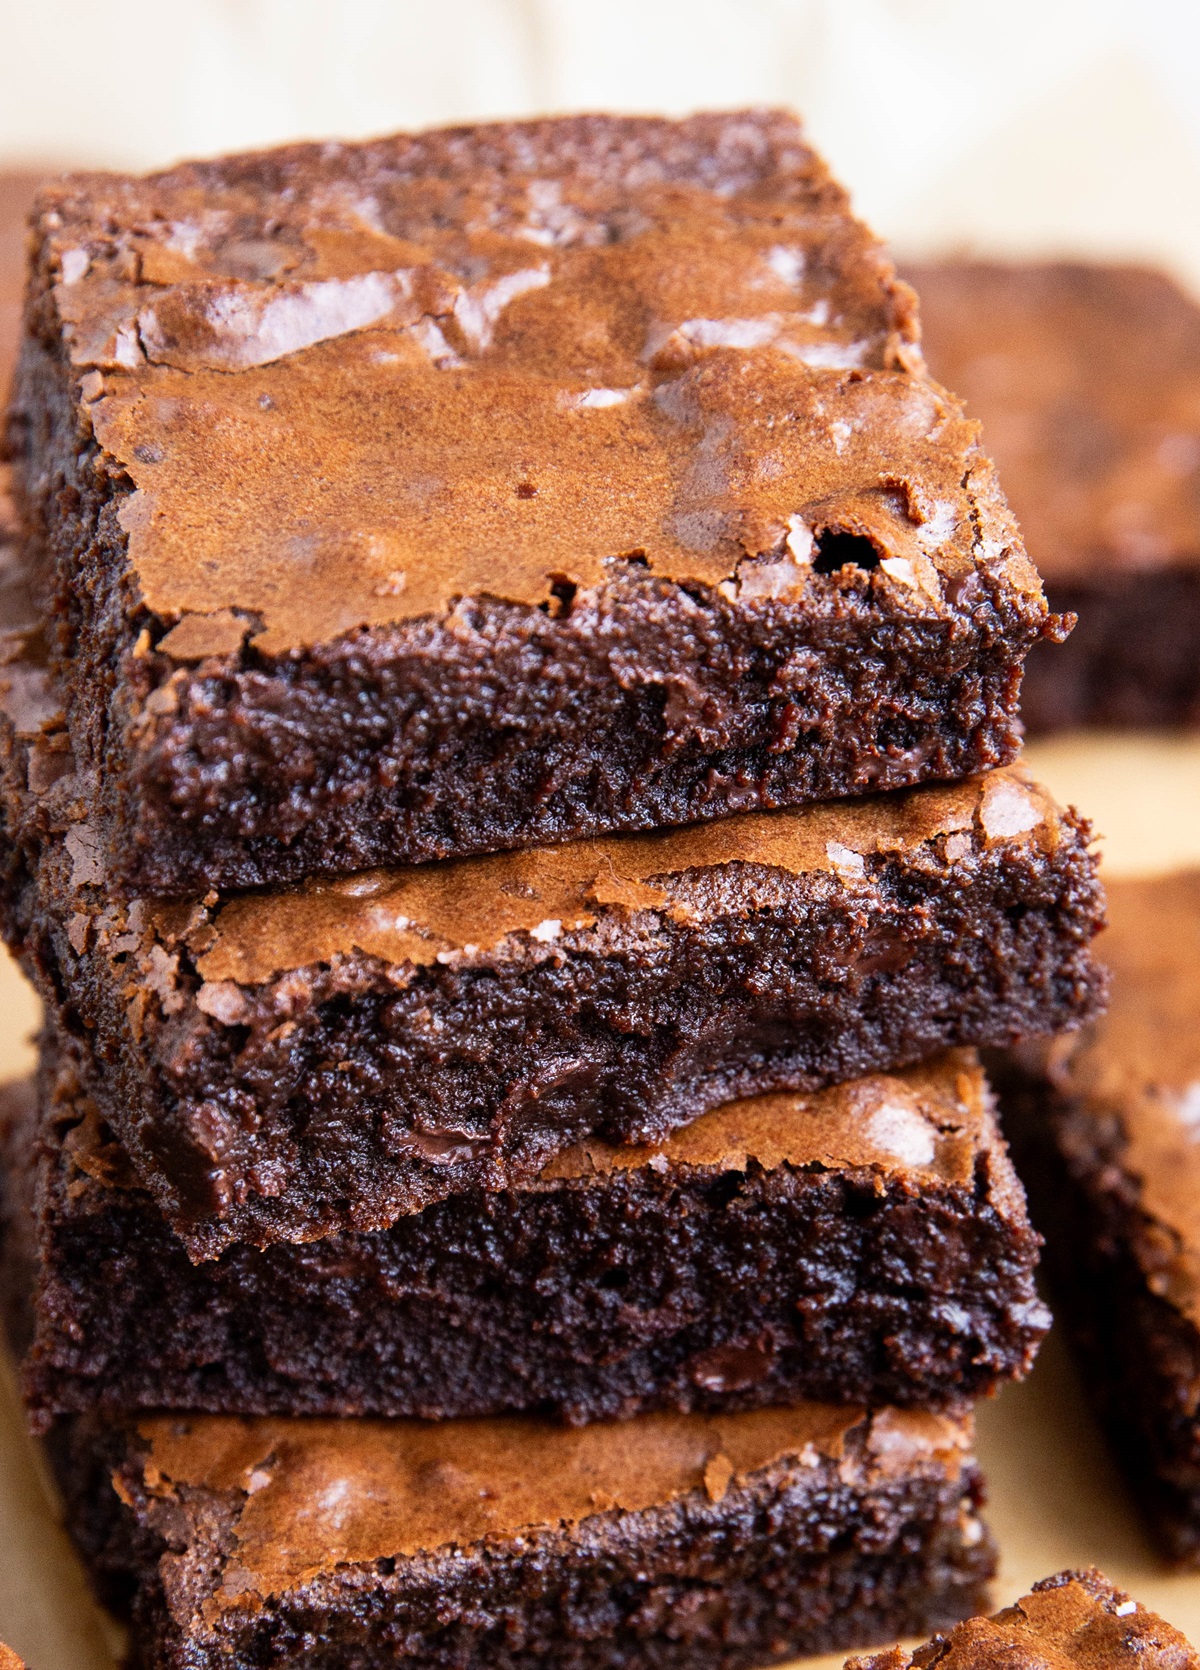 Stack of gluten-free brownies, ready to eat.